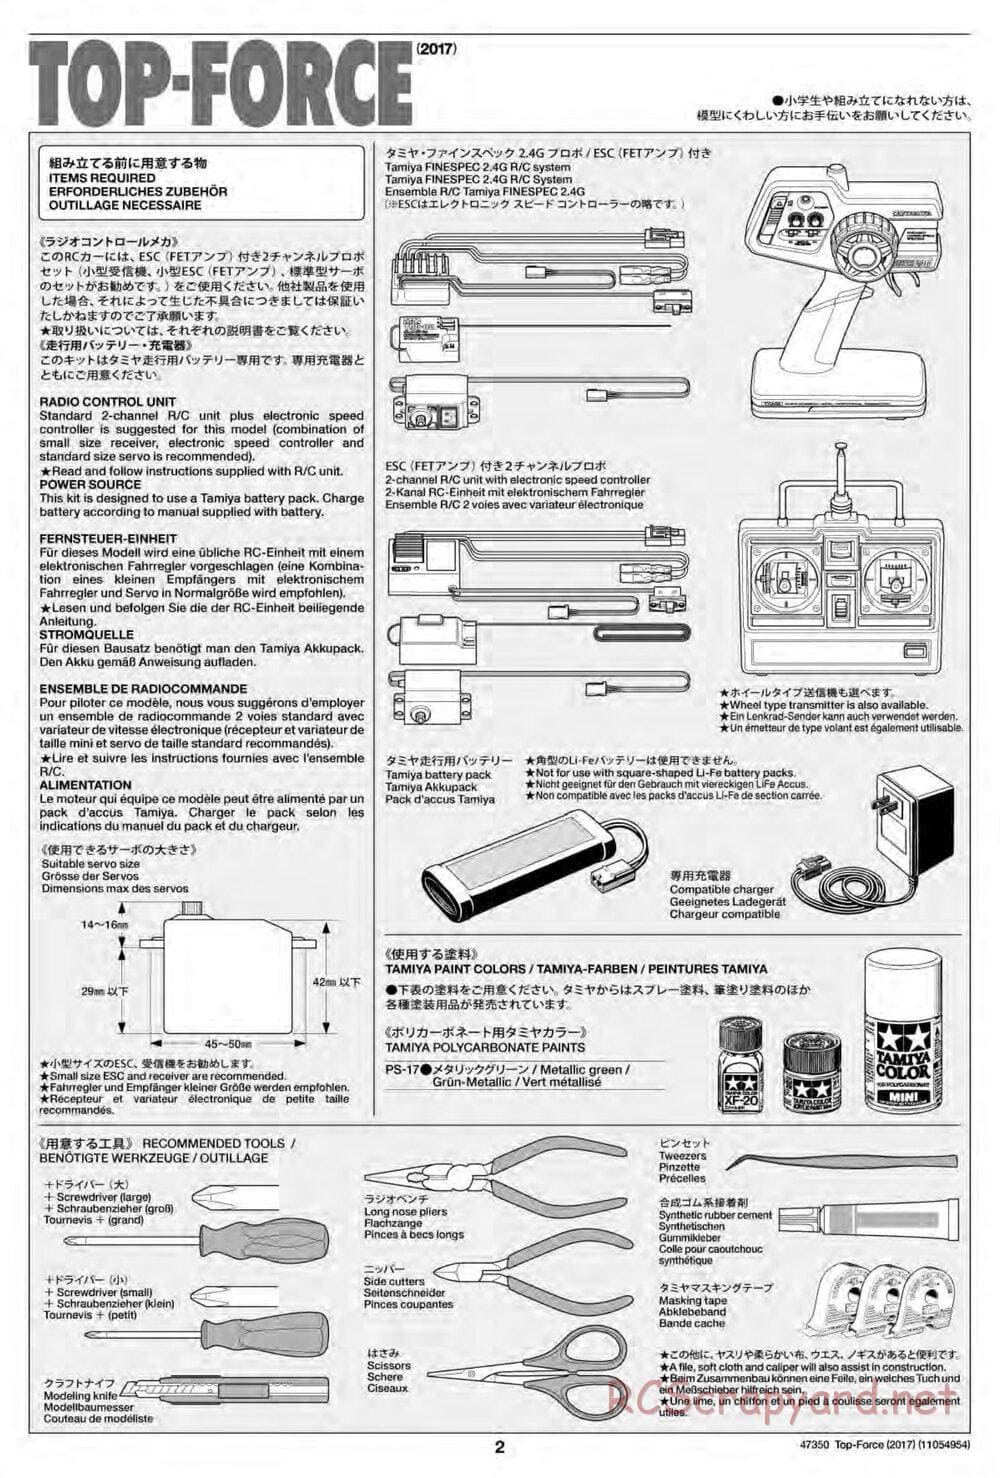 Tamiya - Top Force 2017 - DF-01 Chassis - Manual - Page 2